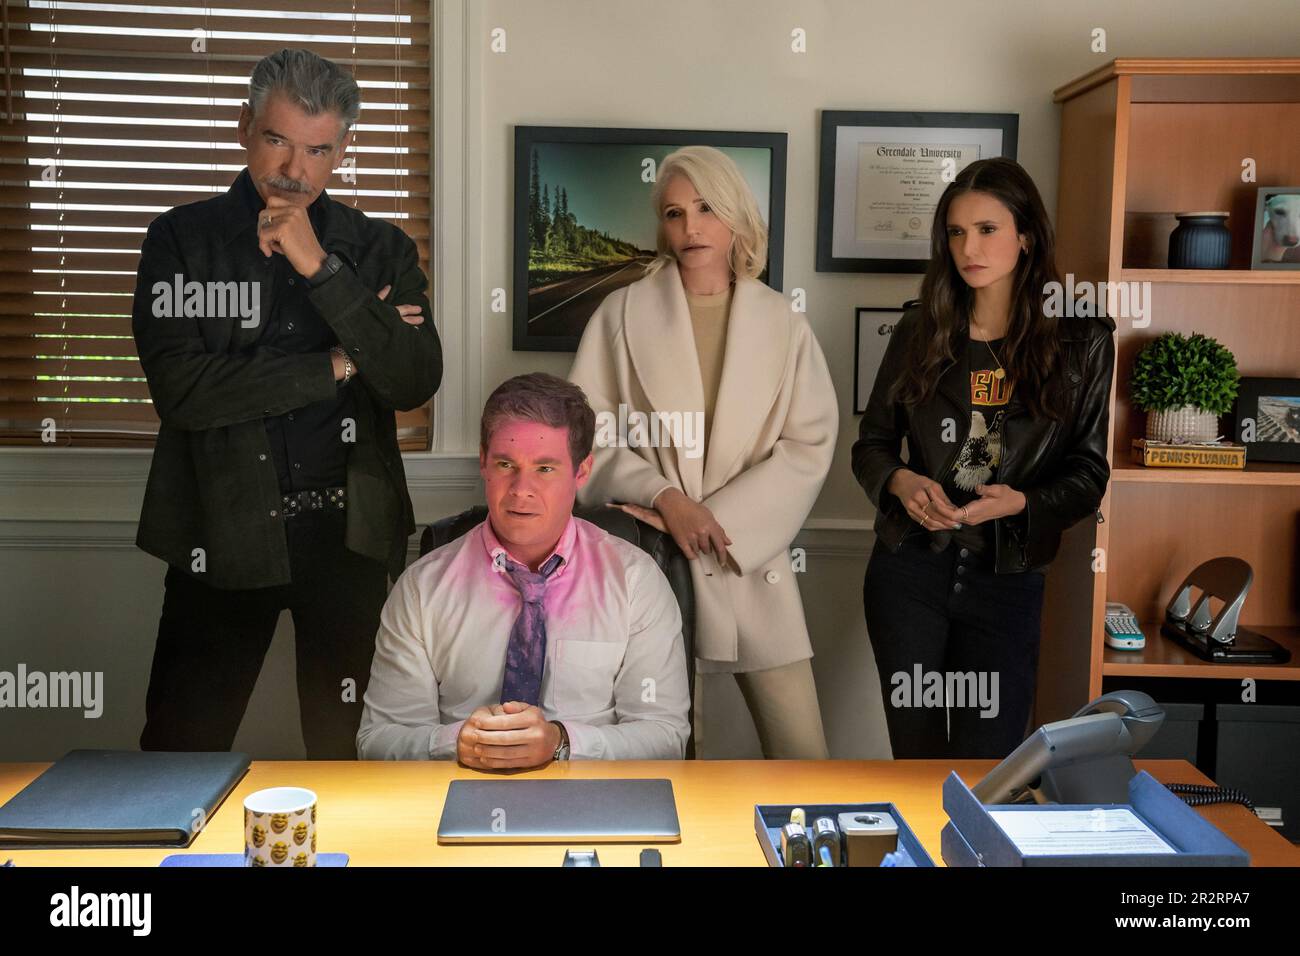 PIERCE BROSNAN, ELLEN BARKIN, NINA DOBREV and ADAM DEVINE in THE OUT-LAWS (2023), directed by TYLER SPINDEL. Credit: HAPPY MADISON PRODUCTIONS / Album Stock Photo